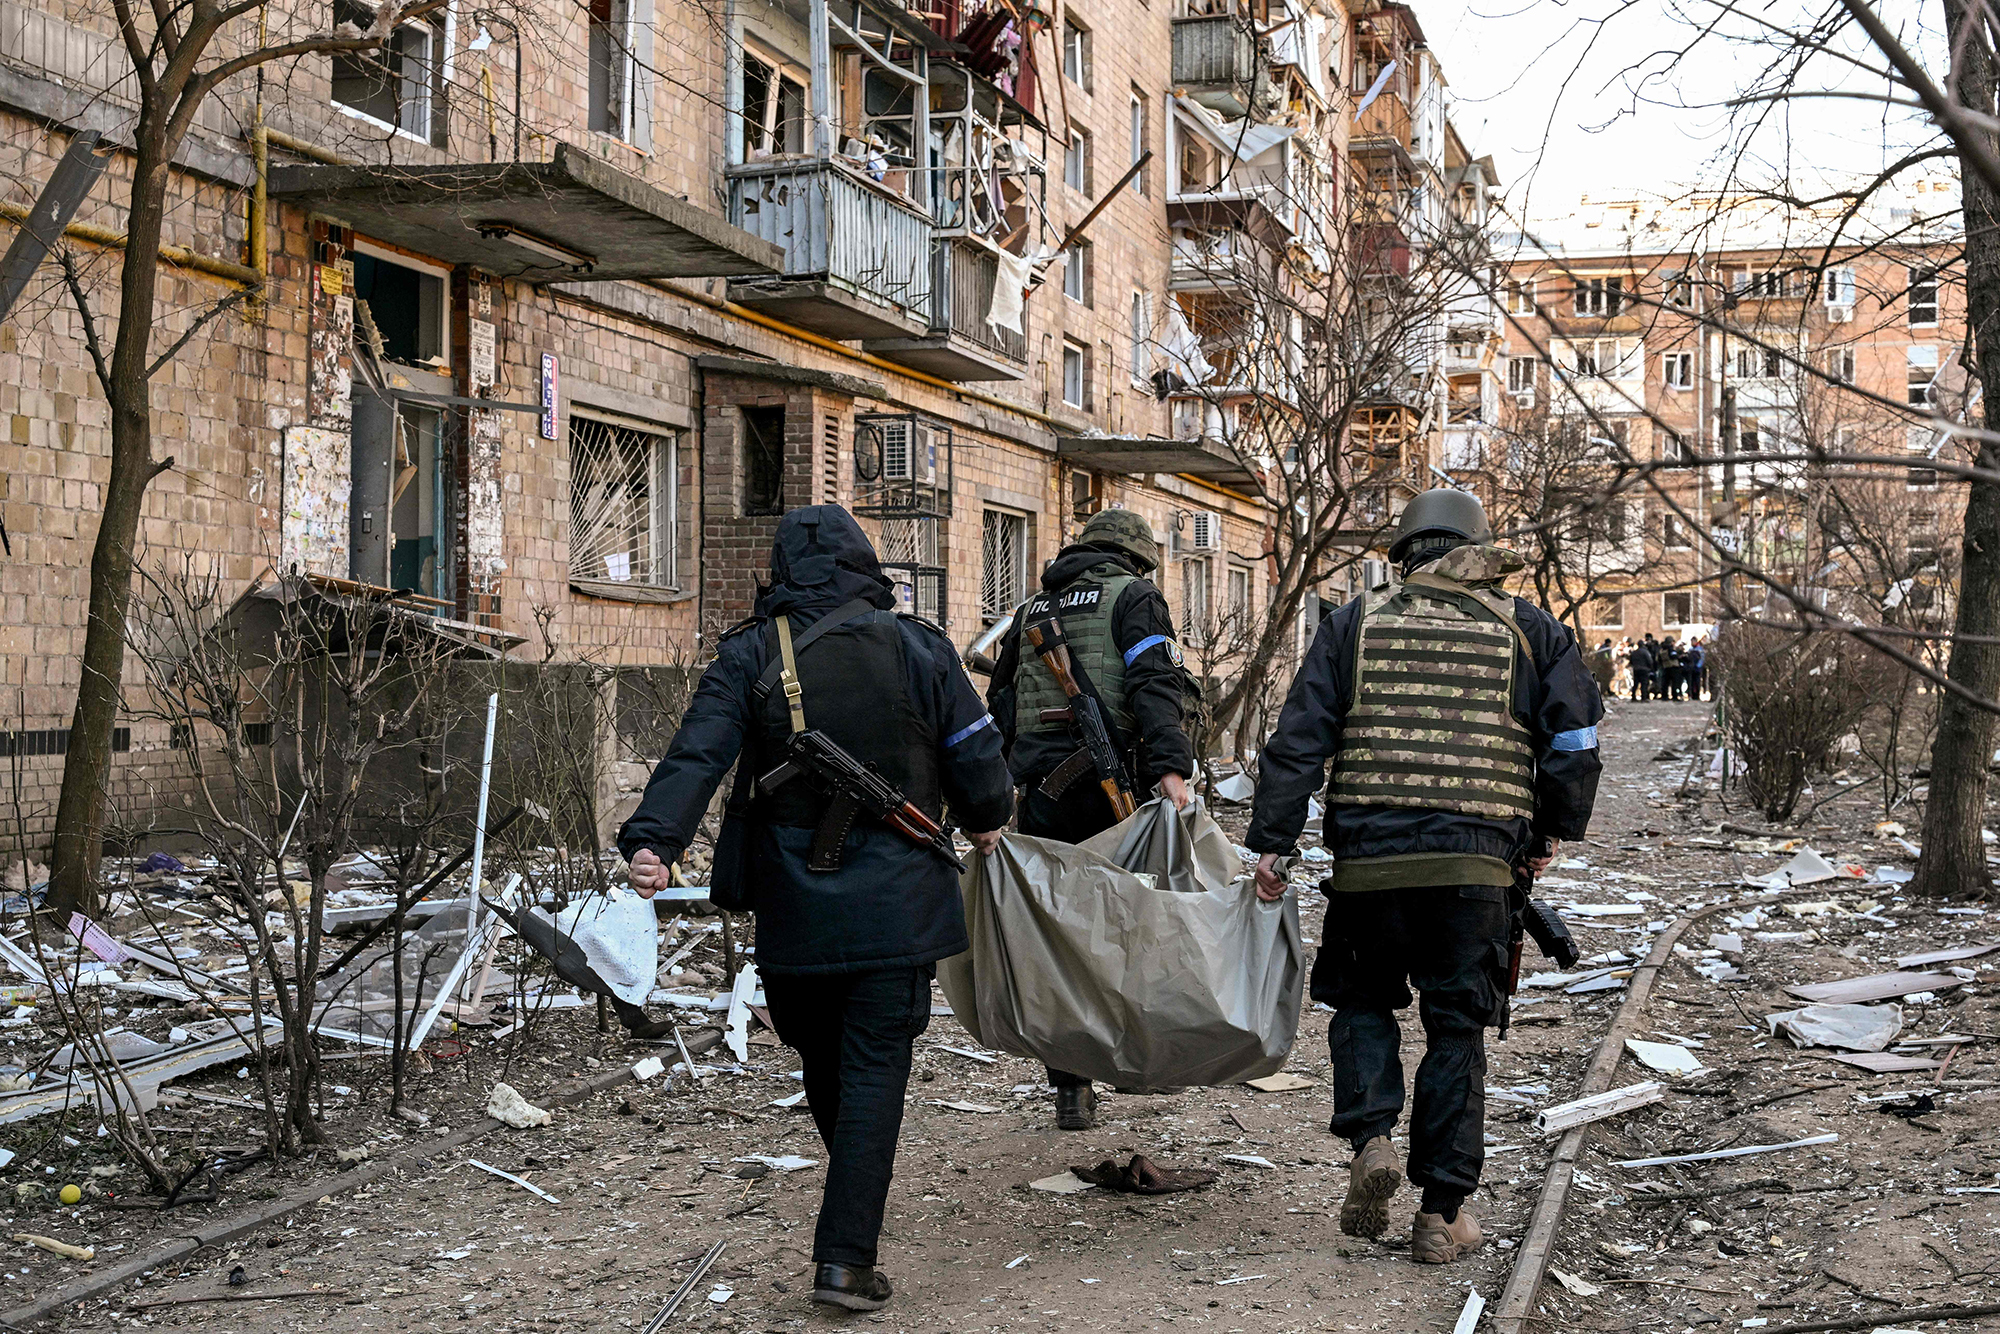 Ukrainian policemen carry a body after a residential building was hit by shelling in Kyiv, Ukraine on March 18.